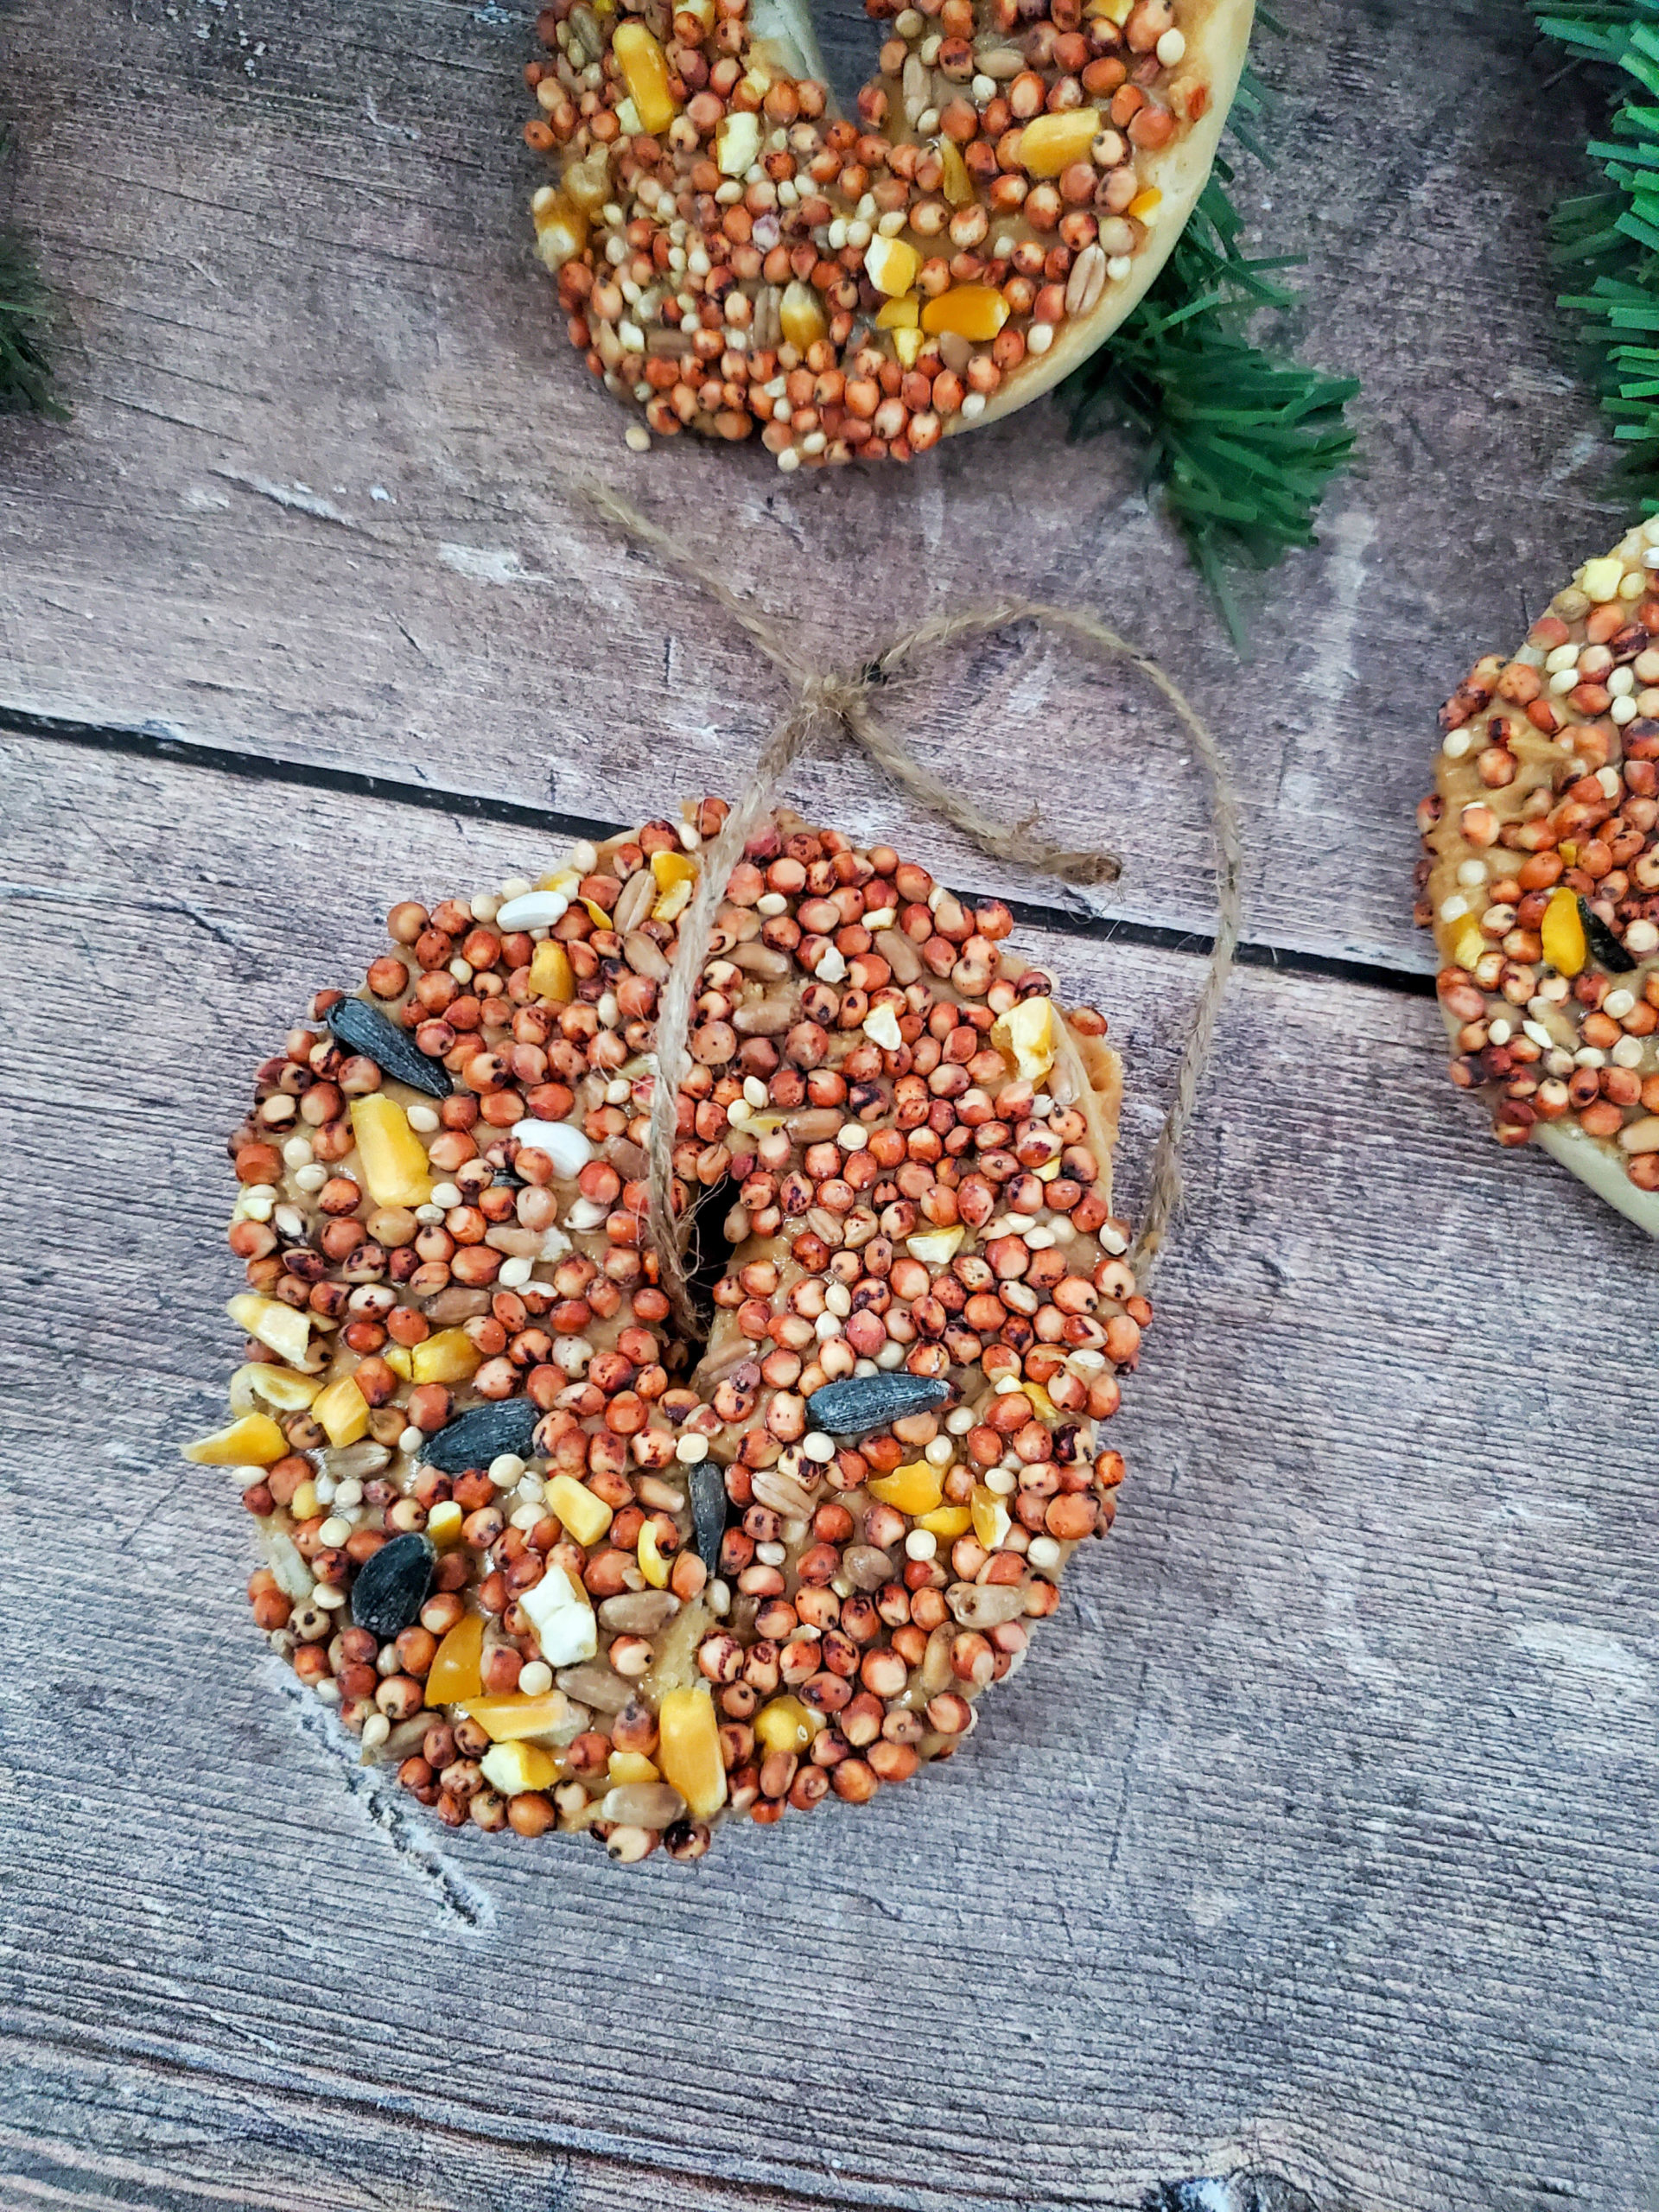 Birdseed Ornaments on a wooden table.